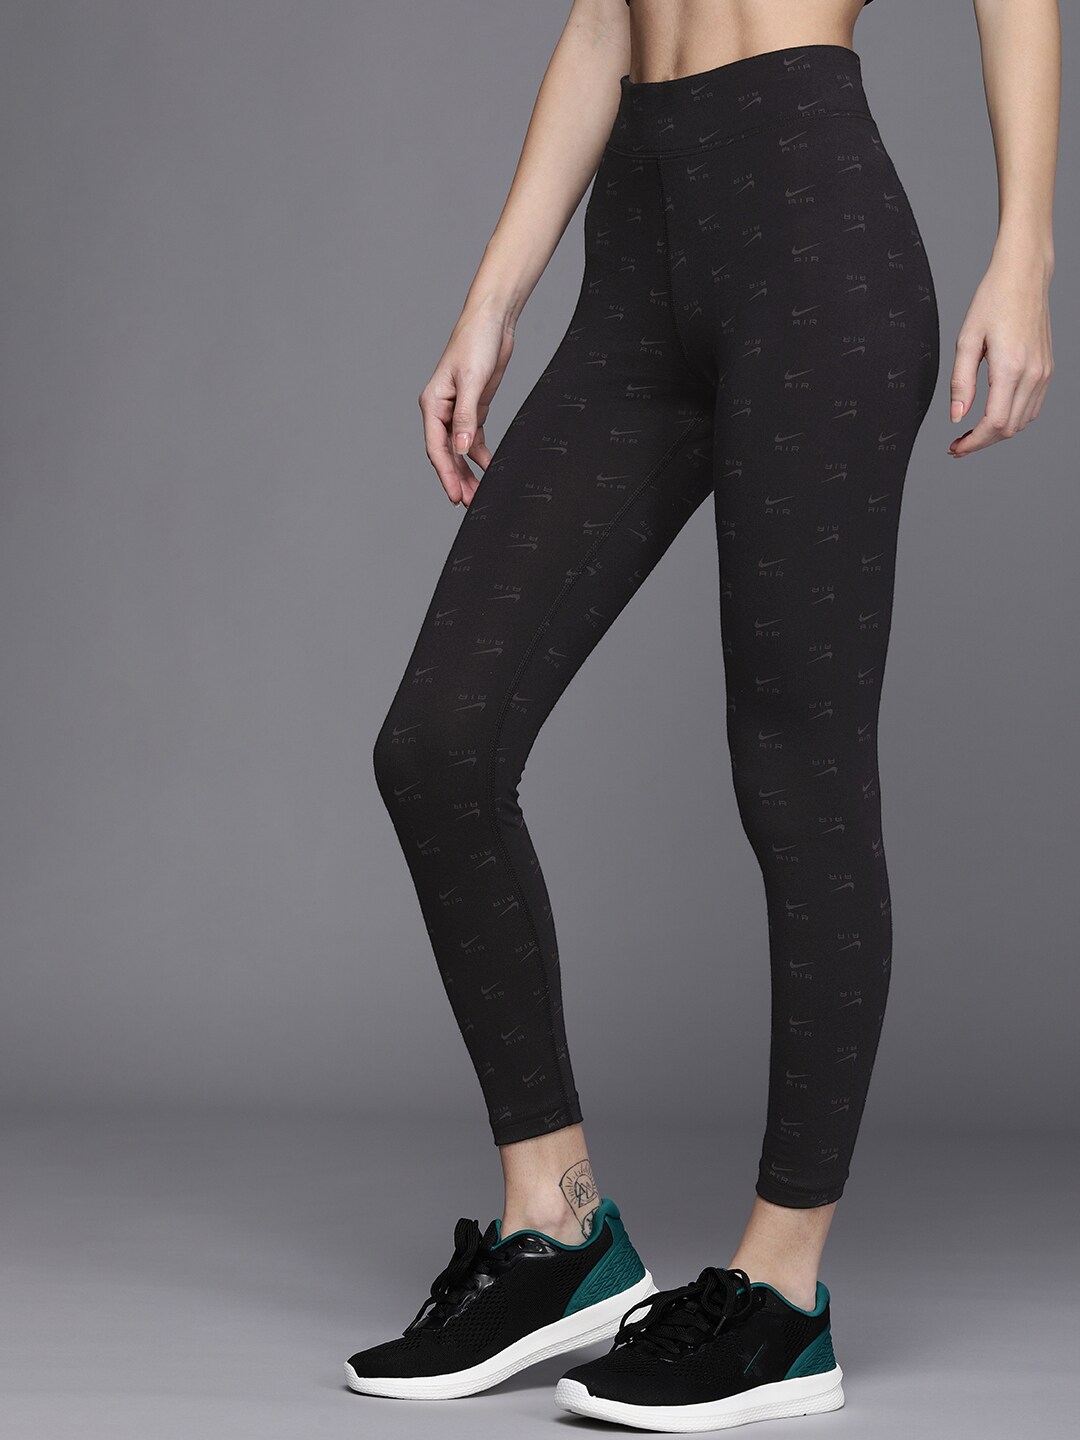 Nike Air Women Logo Print High-Waisted Tights Price in India